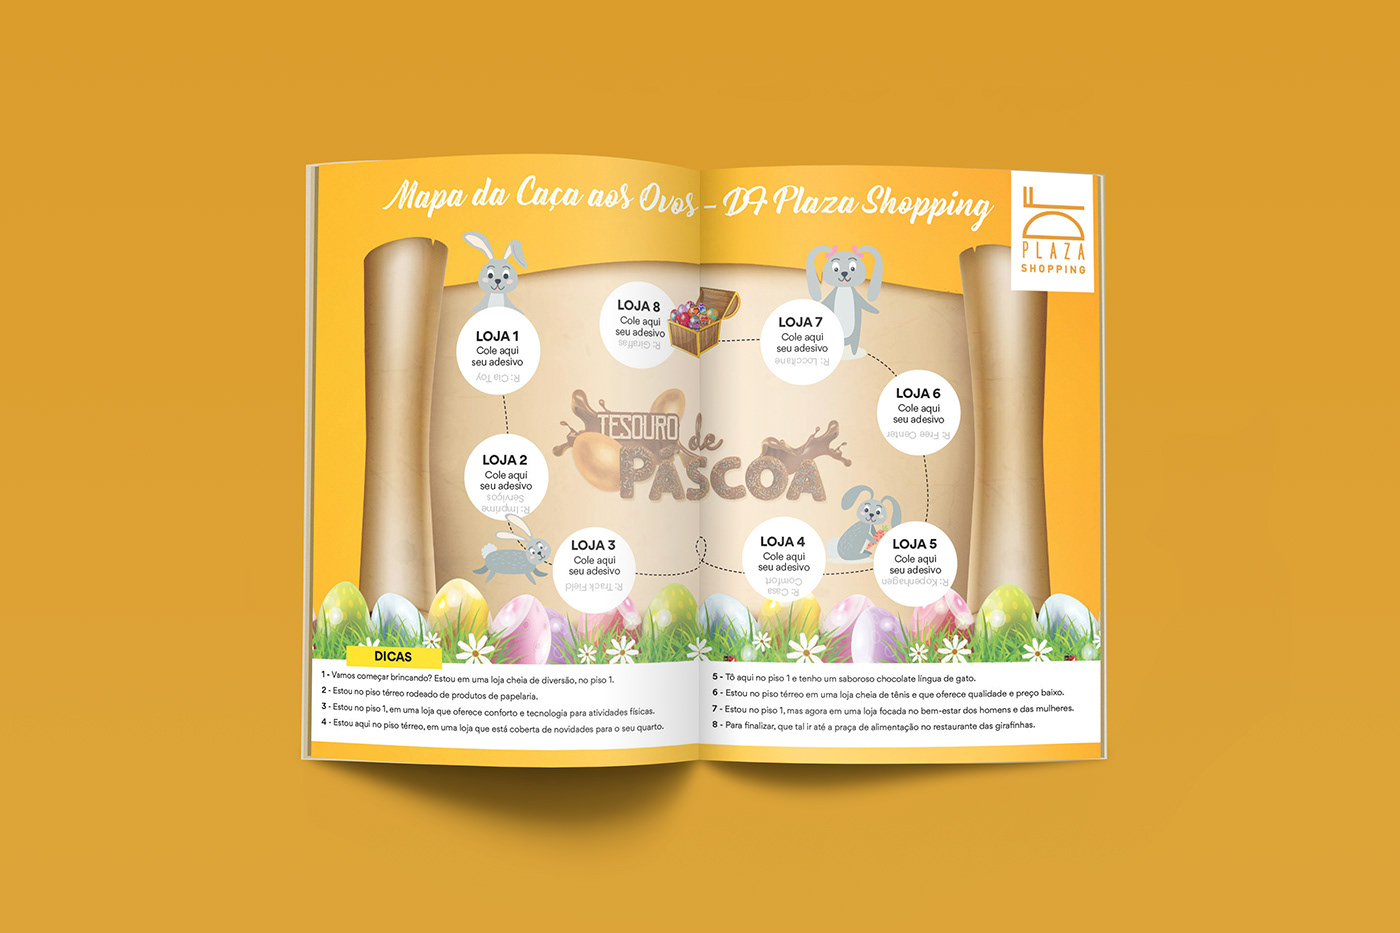 páscoa chocolate retouch Easter egg Advertising  Shopping CHOC yellow